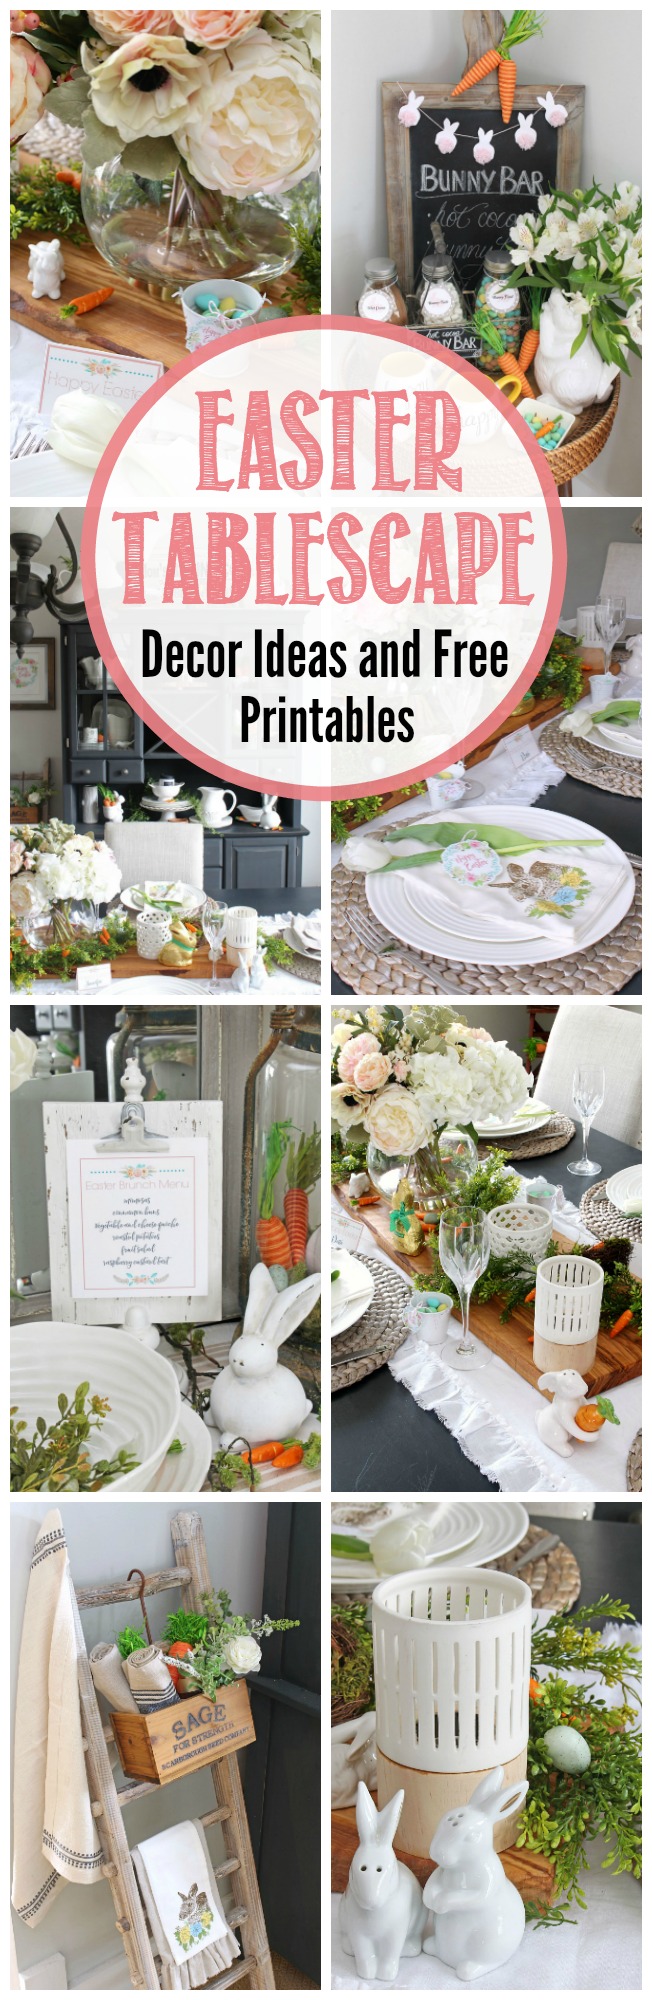 Beautiful ideas to decorate your dining room for Easter. Free printable menus, placecards, and decor items that would be perfect for Easter brunch or Easter dinner.